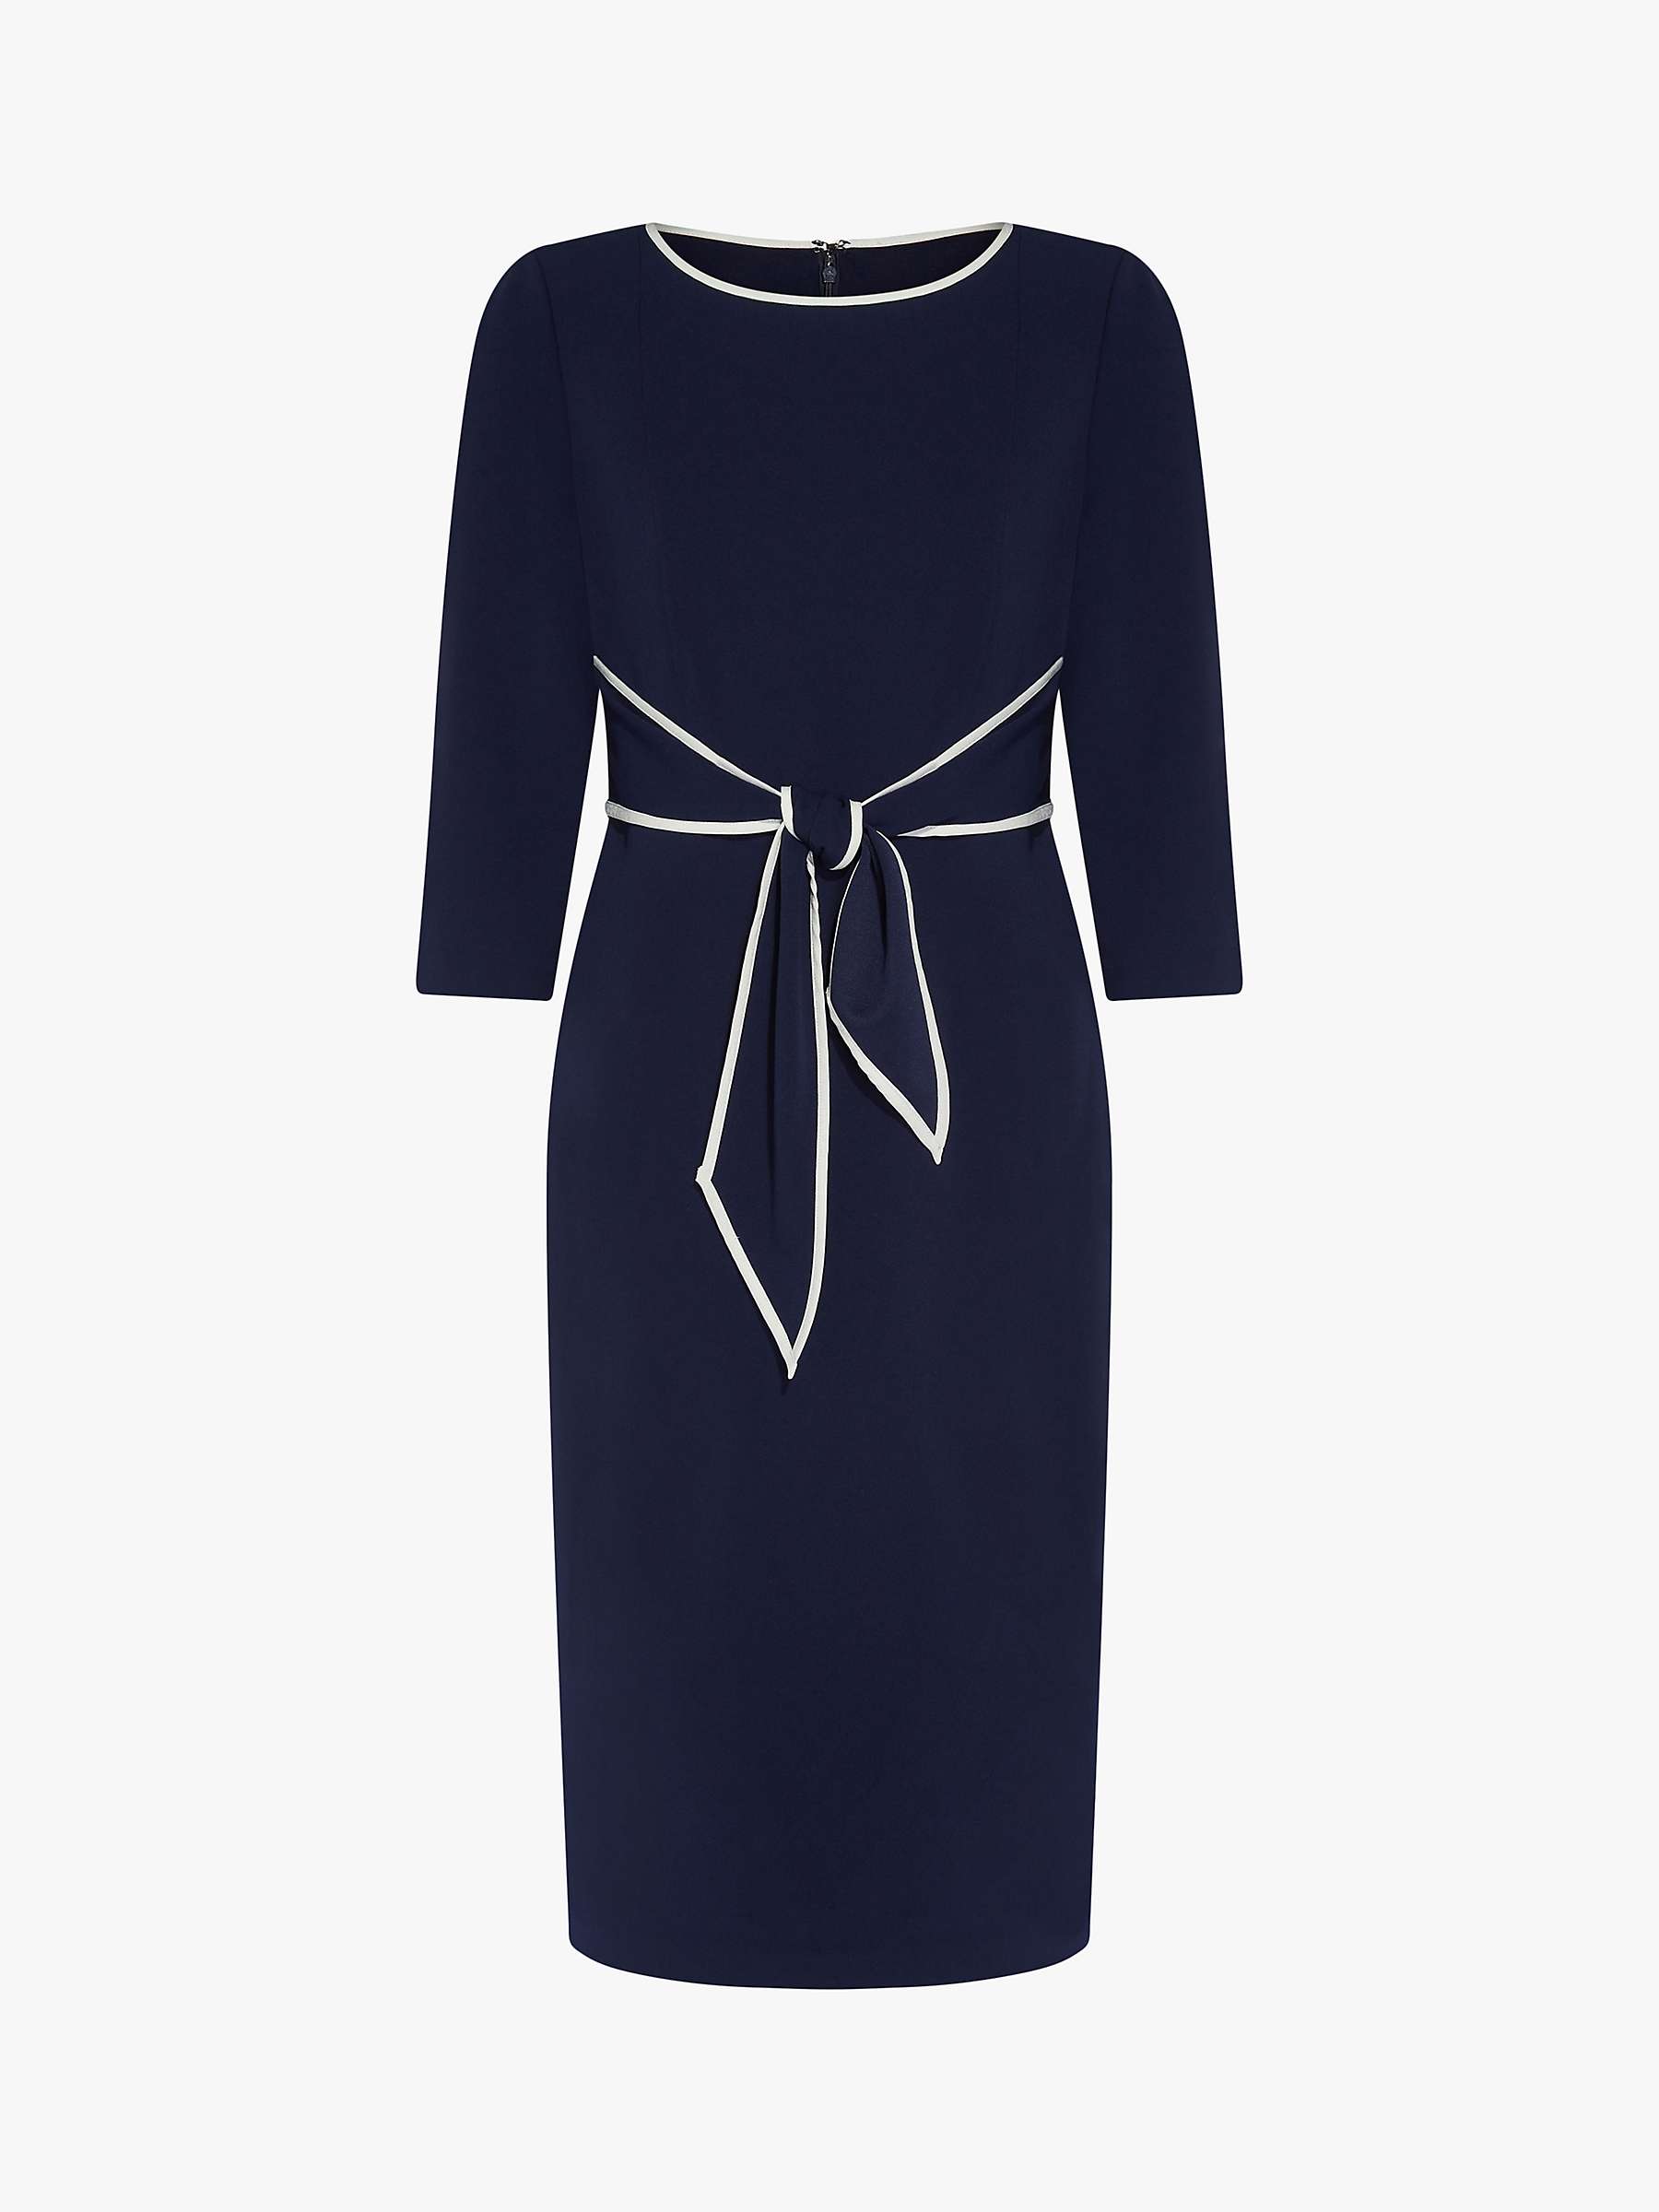 Buy Adrianna Papell Tipped Crepe Tie Waist Midi Dress Online at johnlewis.com